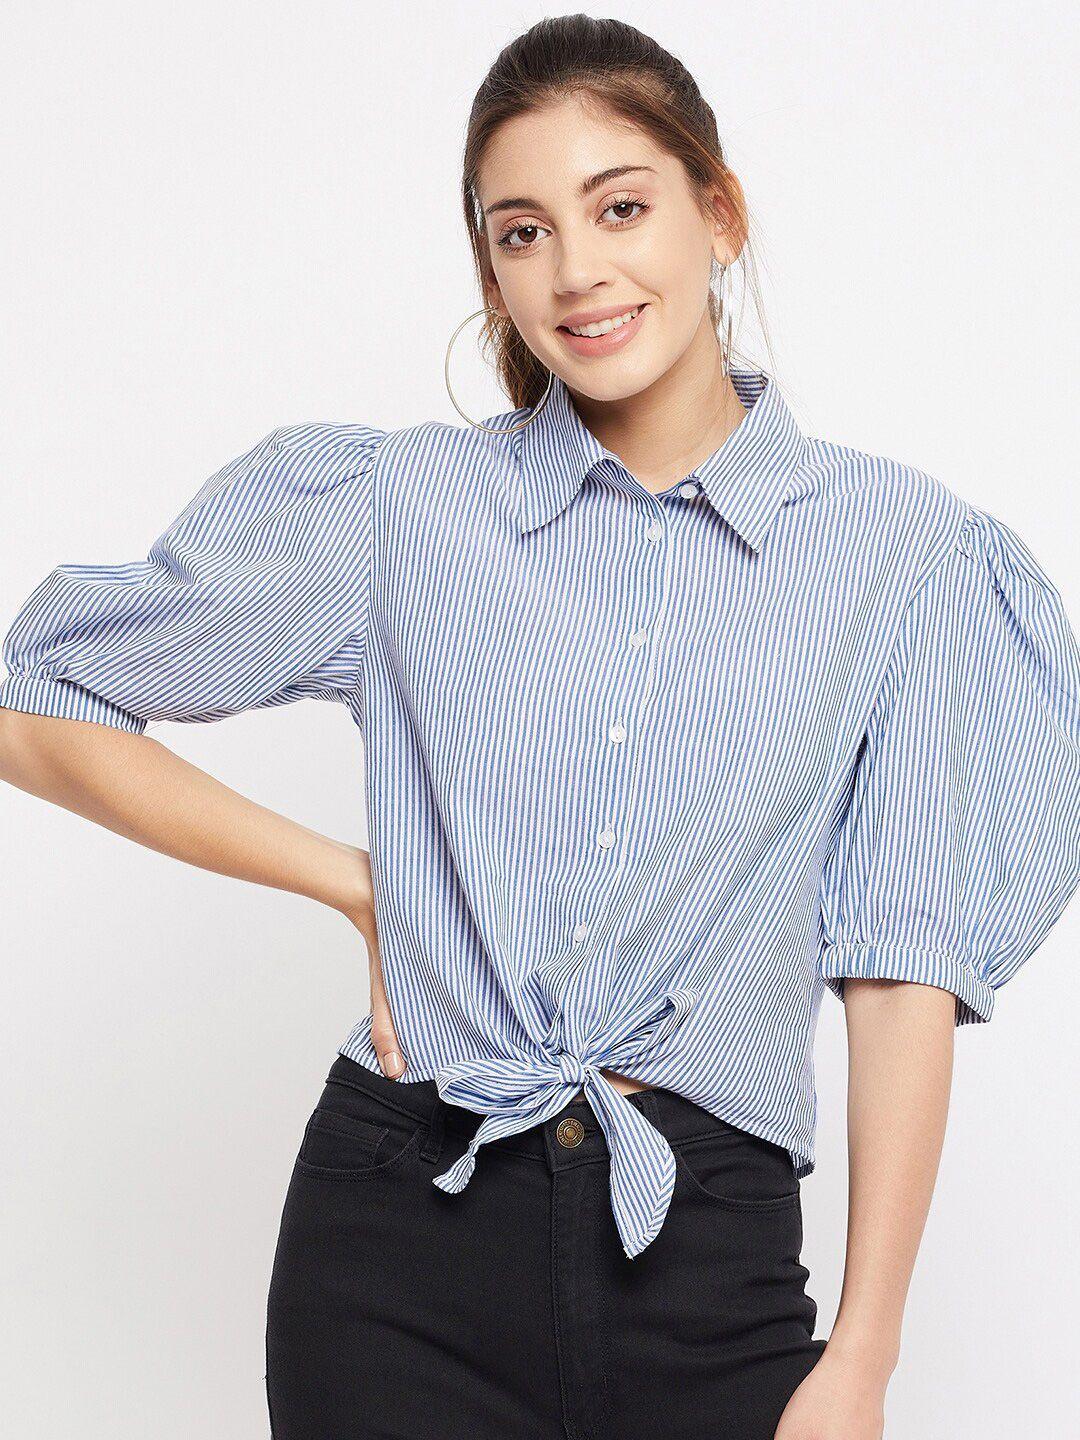 color cocktail women grey striped  pure cotton shirt style crop top